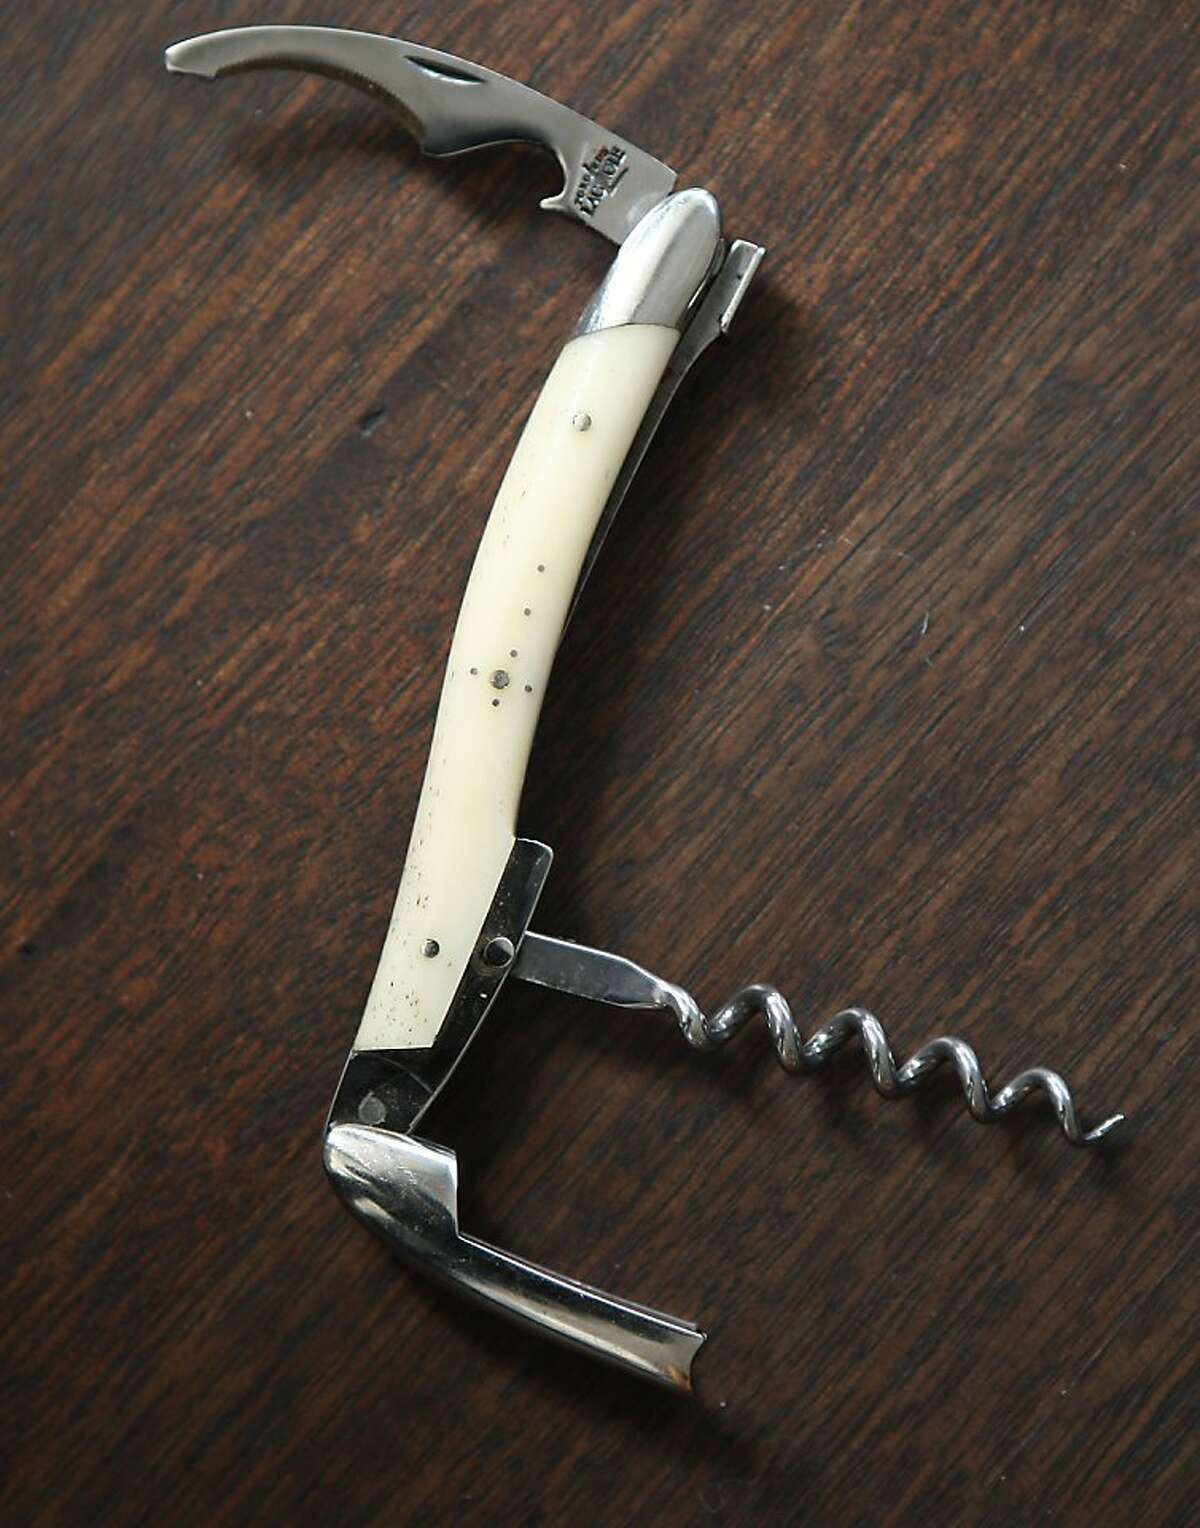 One of chef Daniel Patterson's favorite things, a Forge de Laguiole corkscrew at home in Oakland, Calif., on Thursday, April 21, 2011.